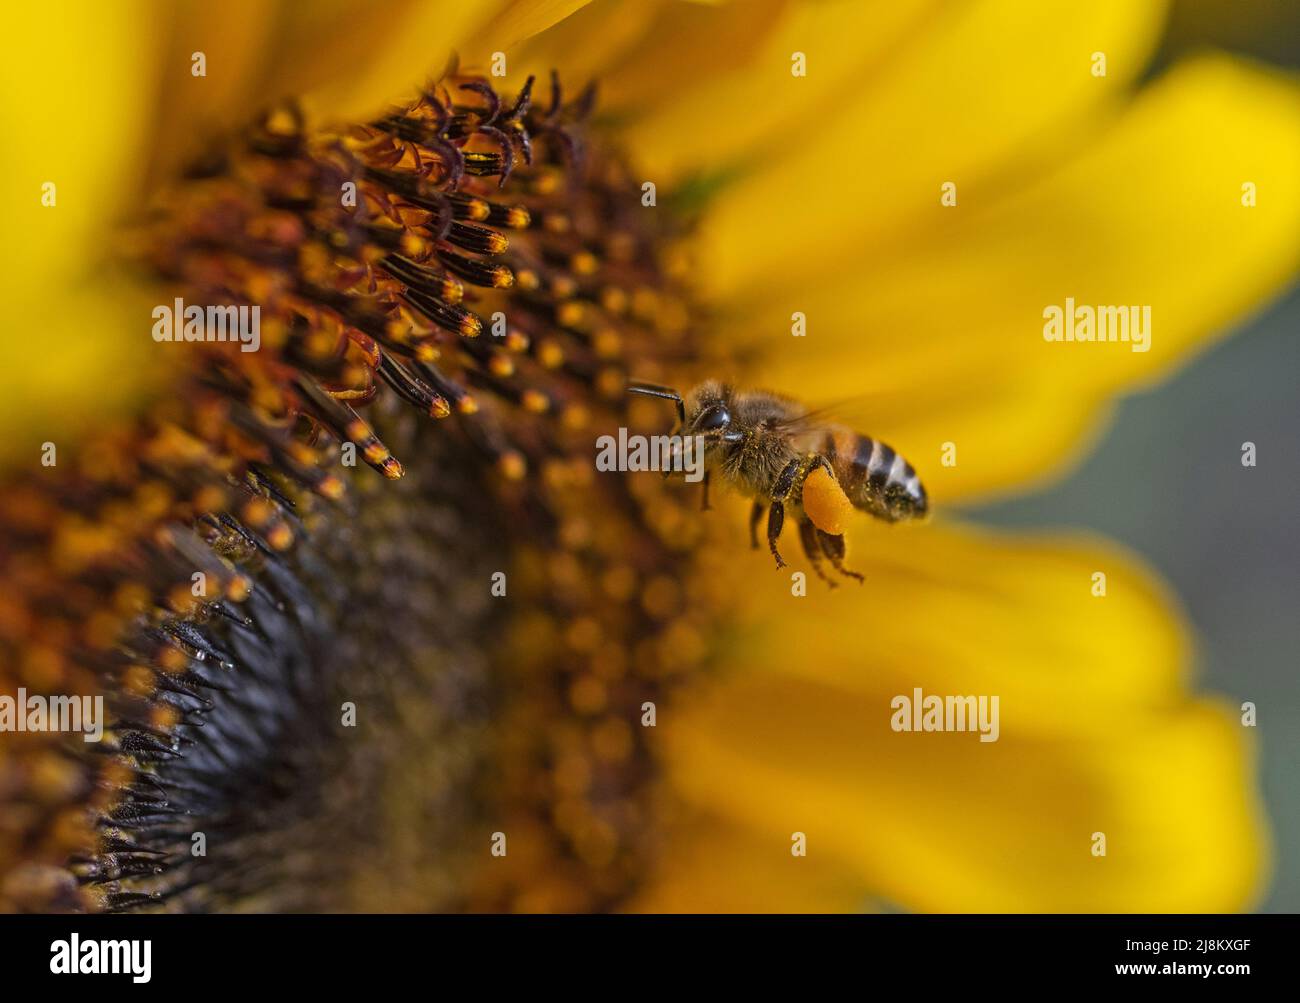 Close-up detail of a yellow sunflower hellanthus annuus with honey bee apis in flight collecting pollen Stock Photo